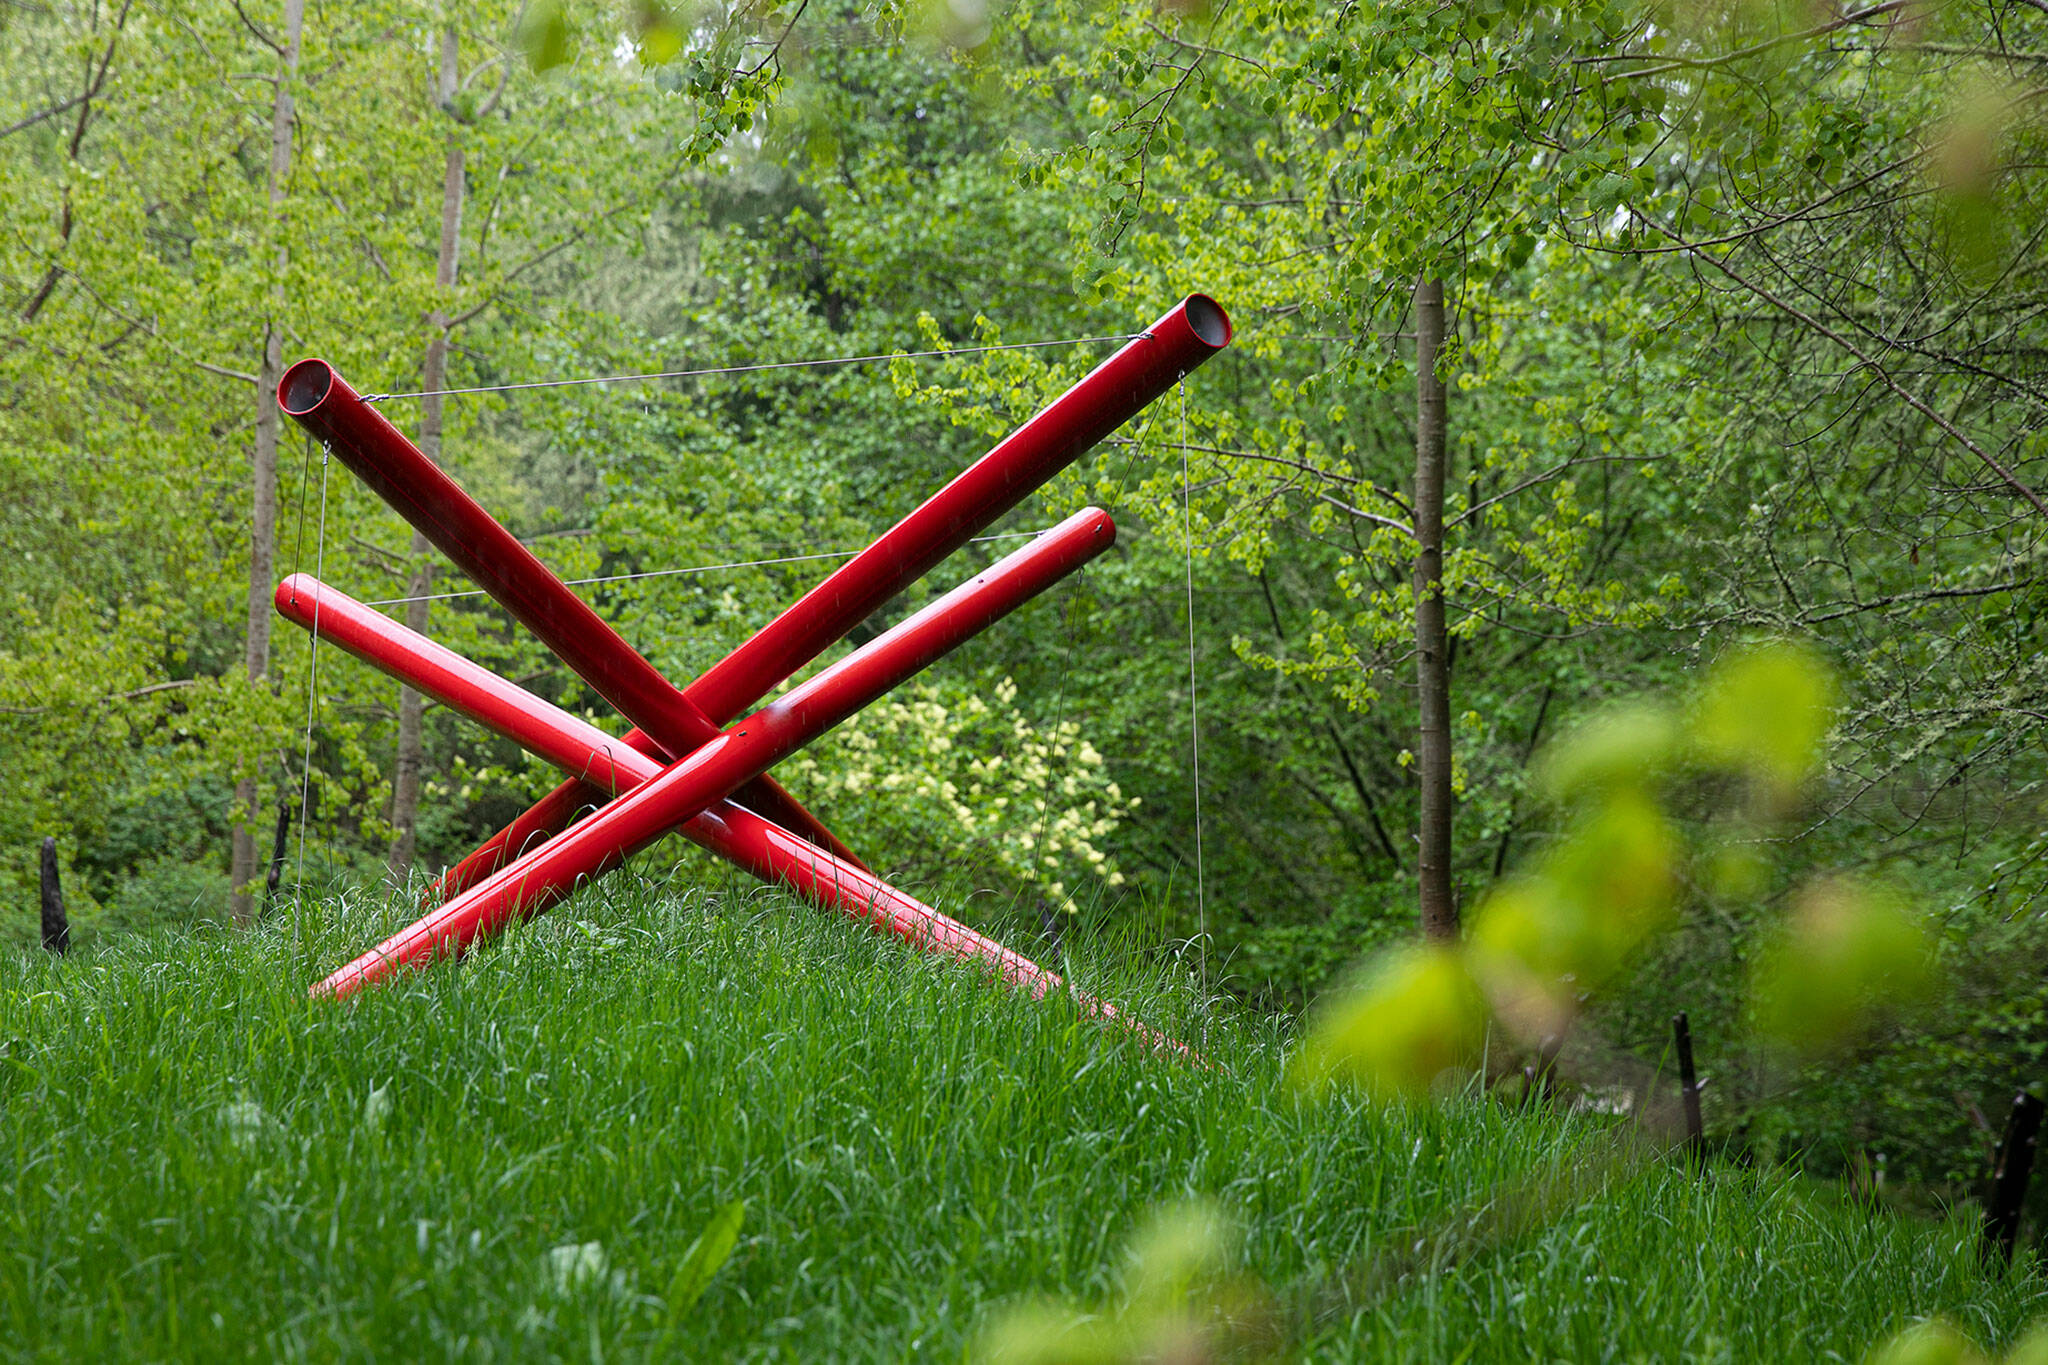 Compressed Cube Tensegrity Sculpture is one of the first sculptures seen from the east parking lot Thursday, May 5, 2022, at Earth Sanctuary in Clinton, Washington. (Ryan Berry / The Herald)